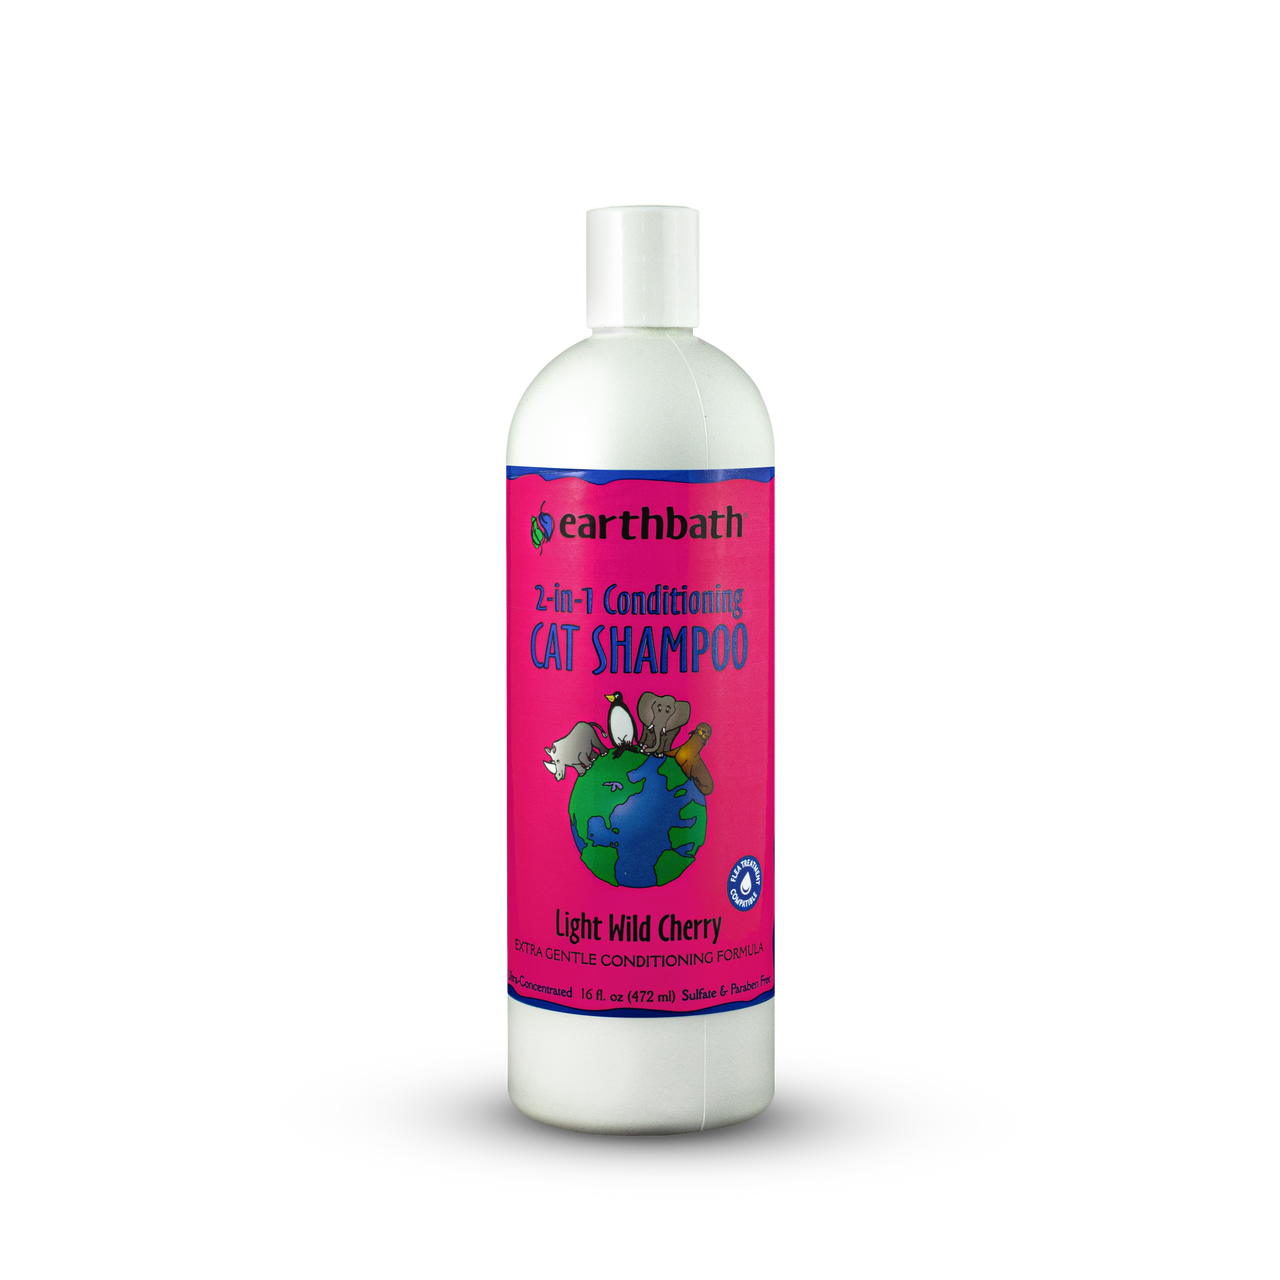 Earthbath 2-in-1 Conditioning Shampoo for Cats, Light Wild Cherry 16oz